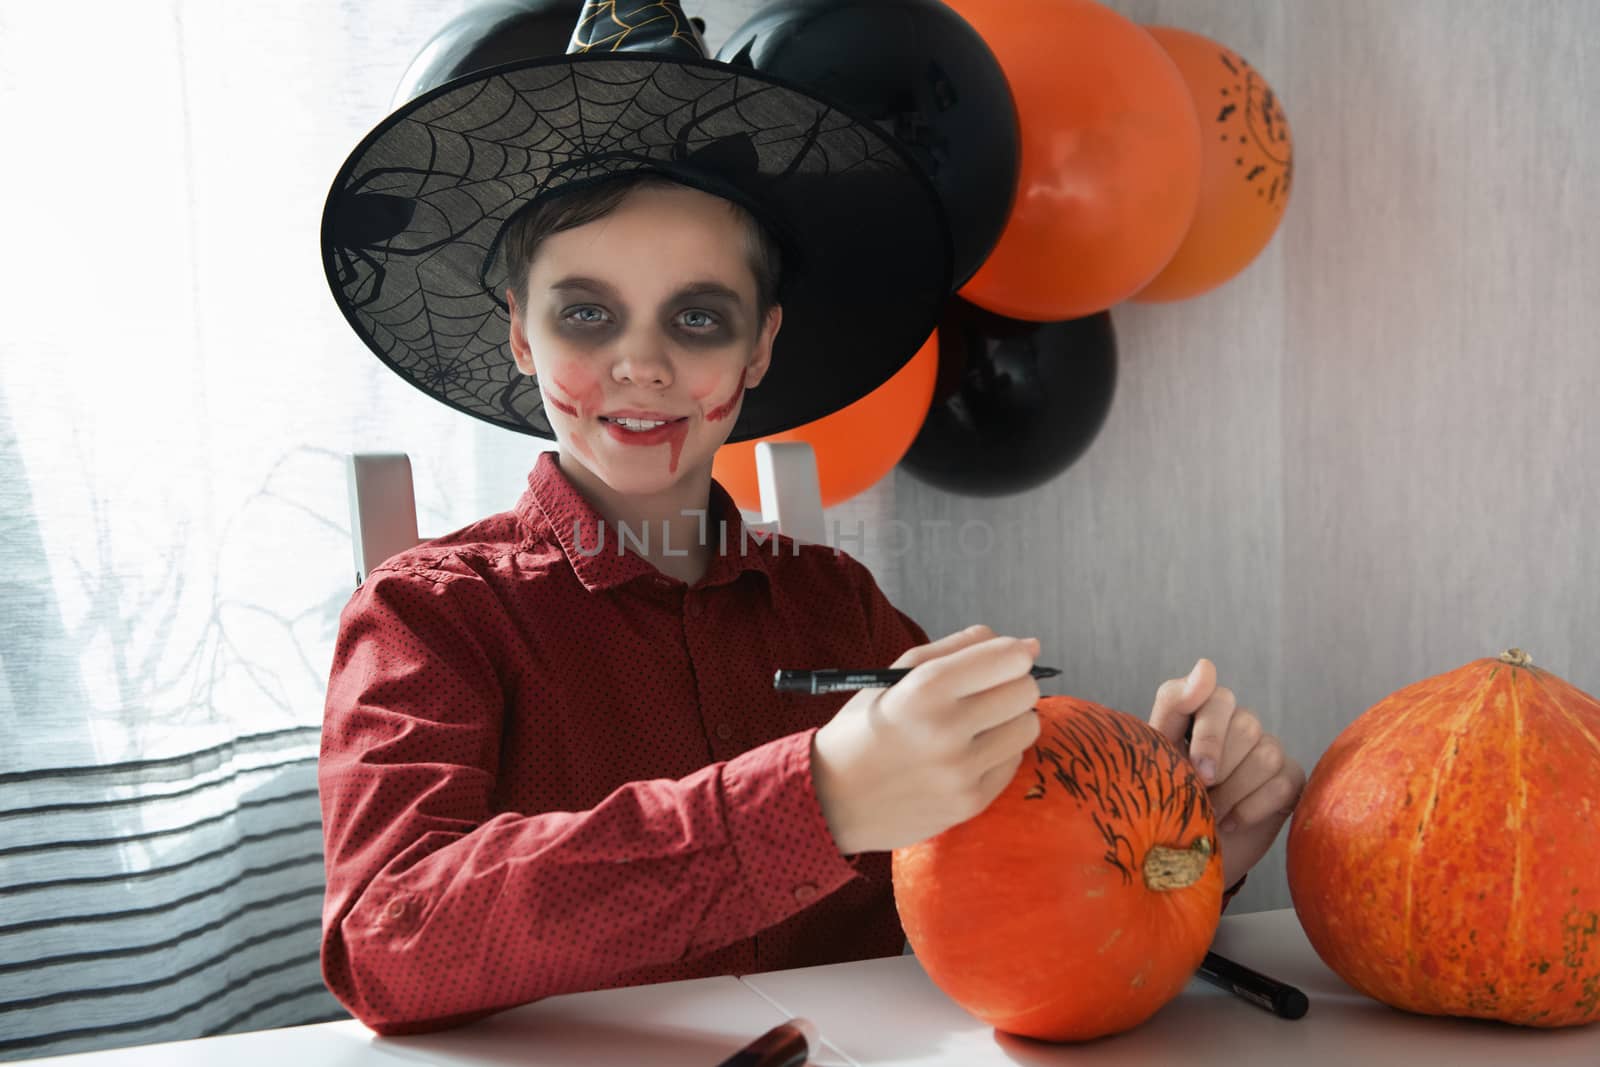 Happy teen boy in costume preparing for the Halloween celebration drawing a pumpkin. Halloween carnival or masquerade concept